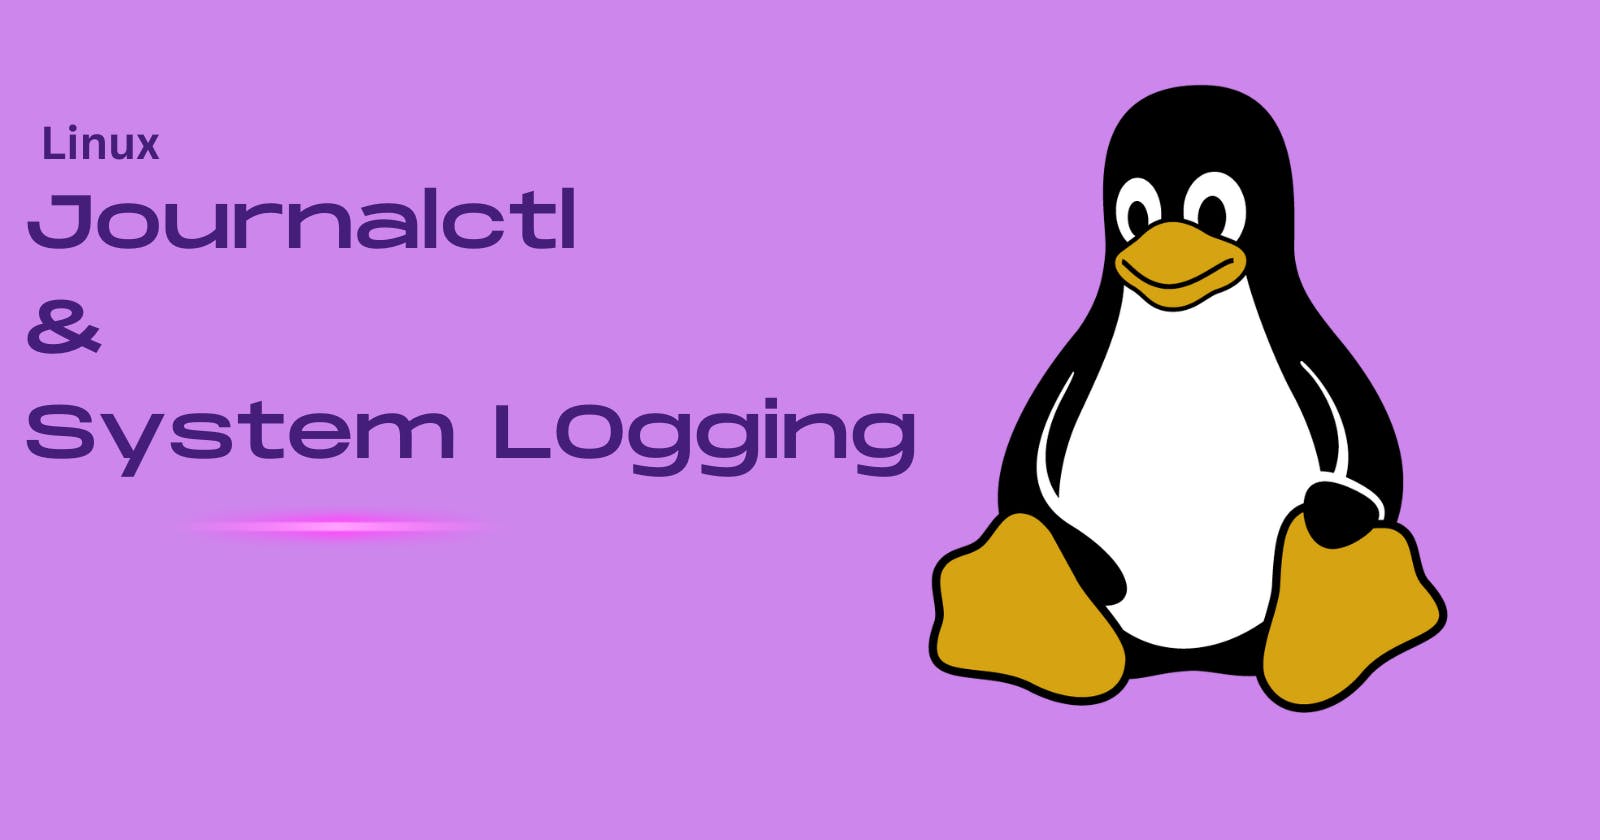 Journalctl: The Ultimate Tool for System Logging and Analysis"